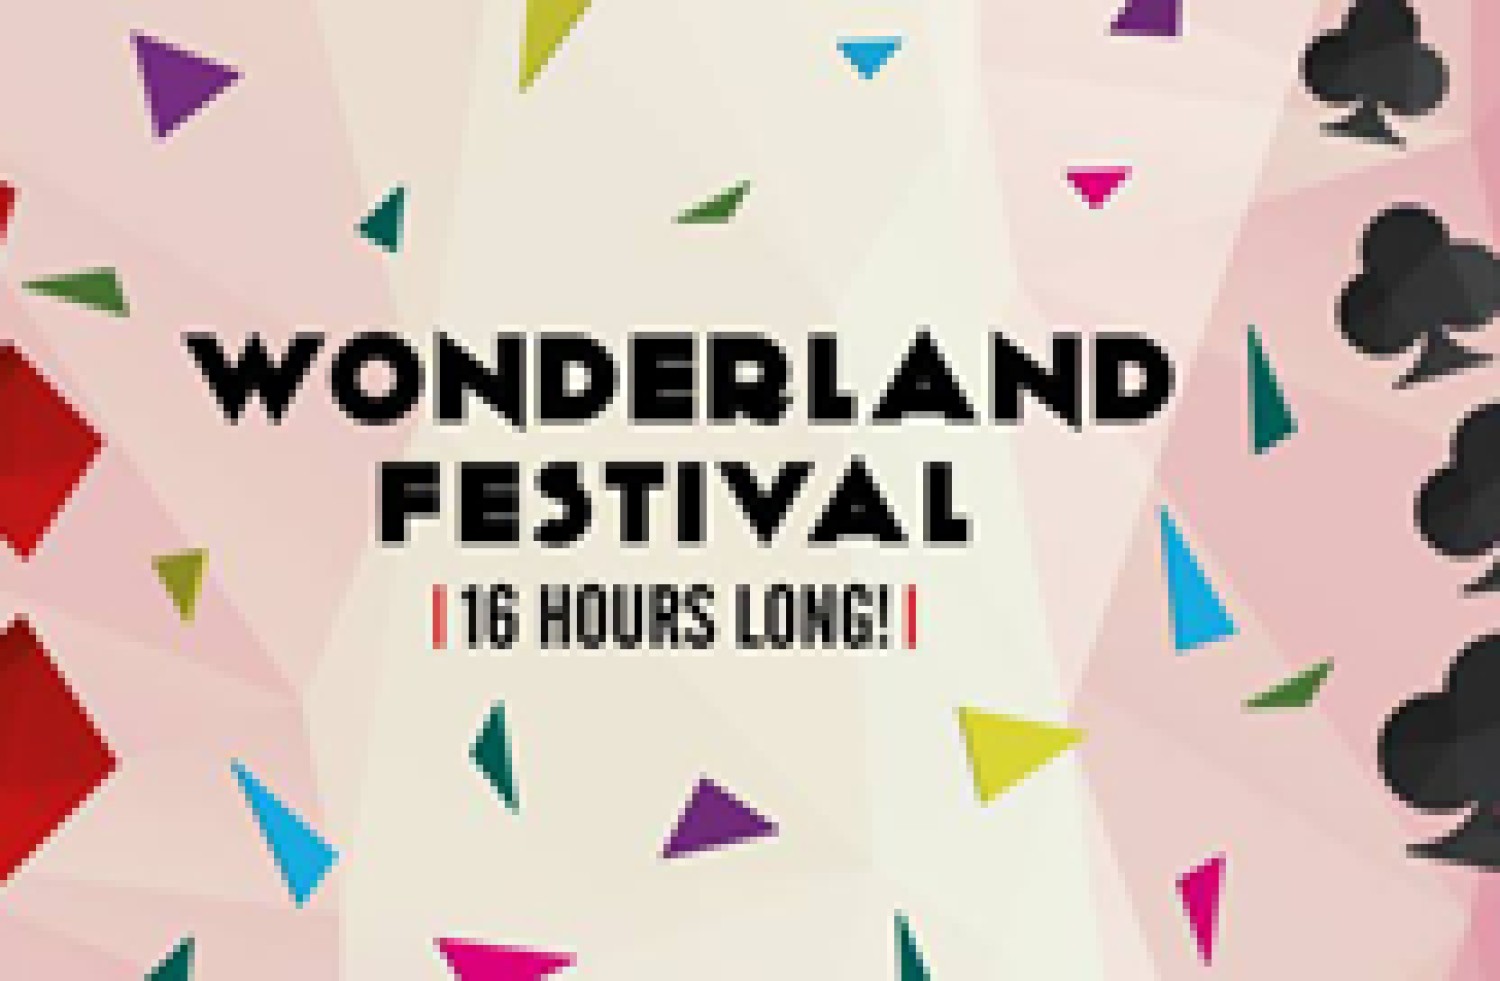 Party report: Wonderland Festival 2015, Oegstgeest (14-02-2015)